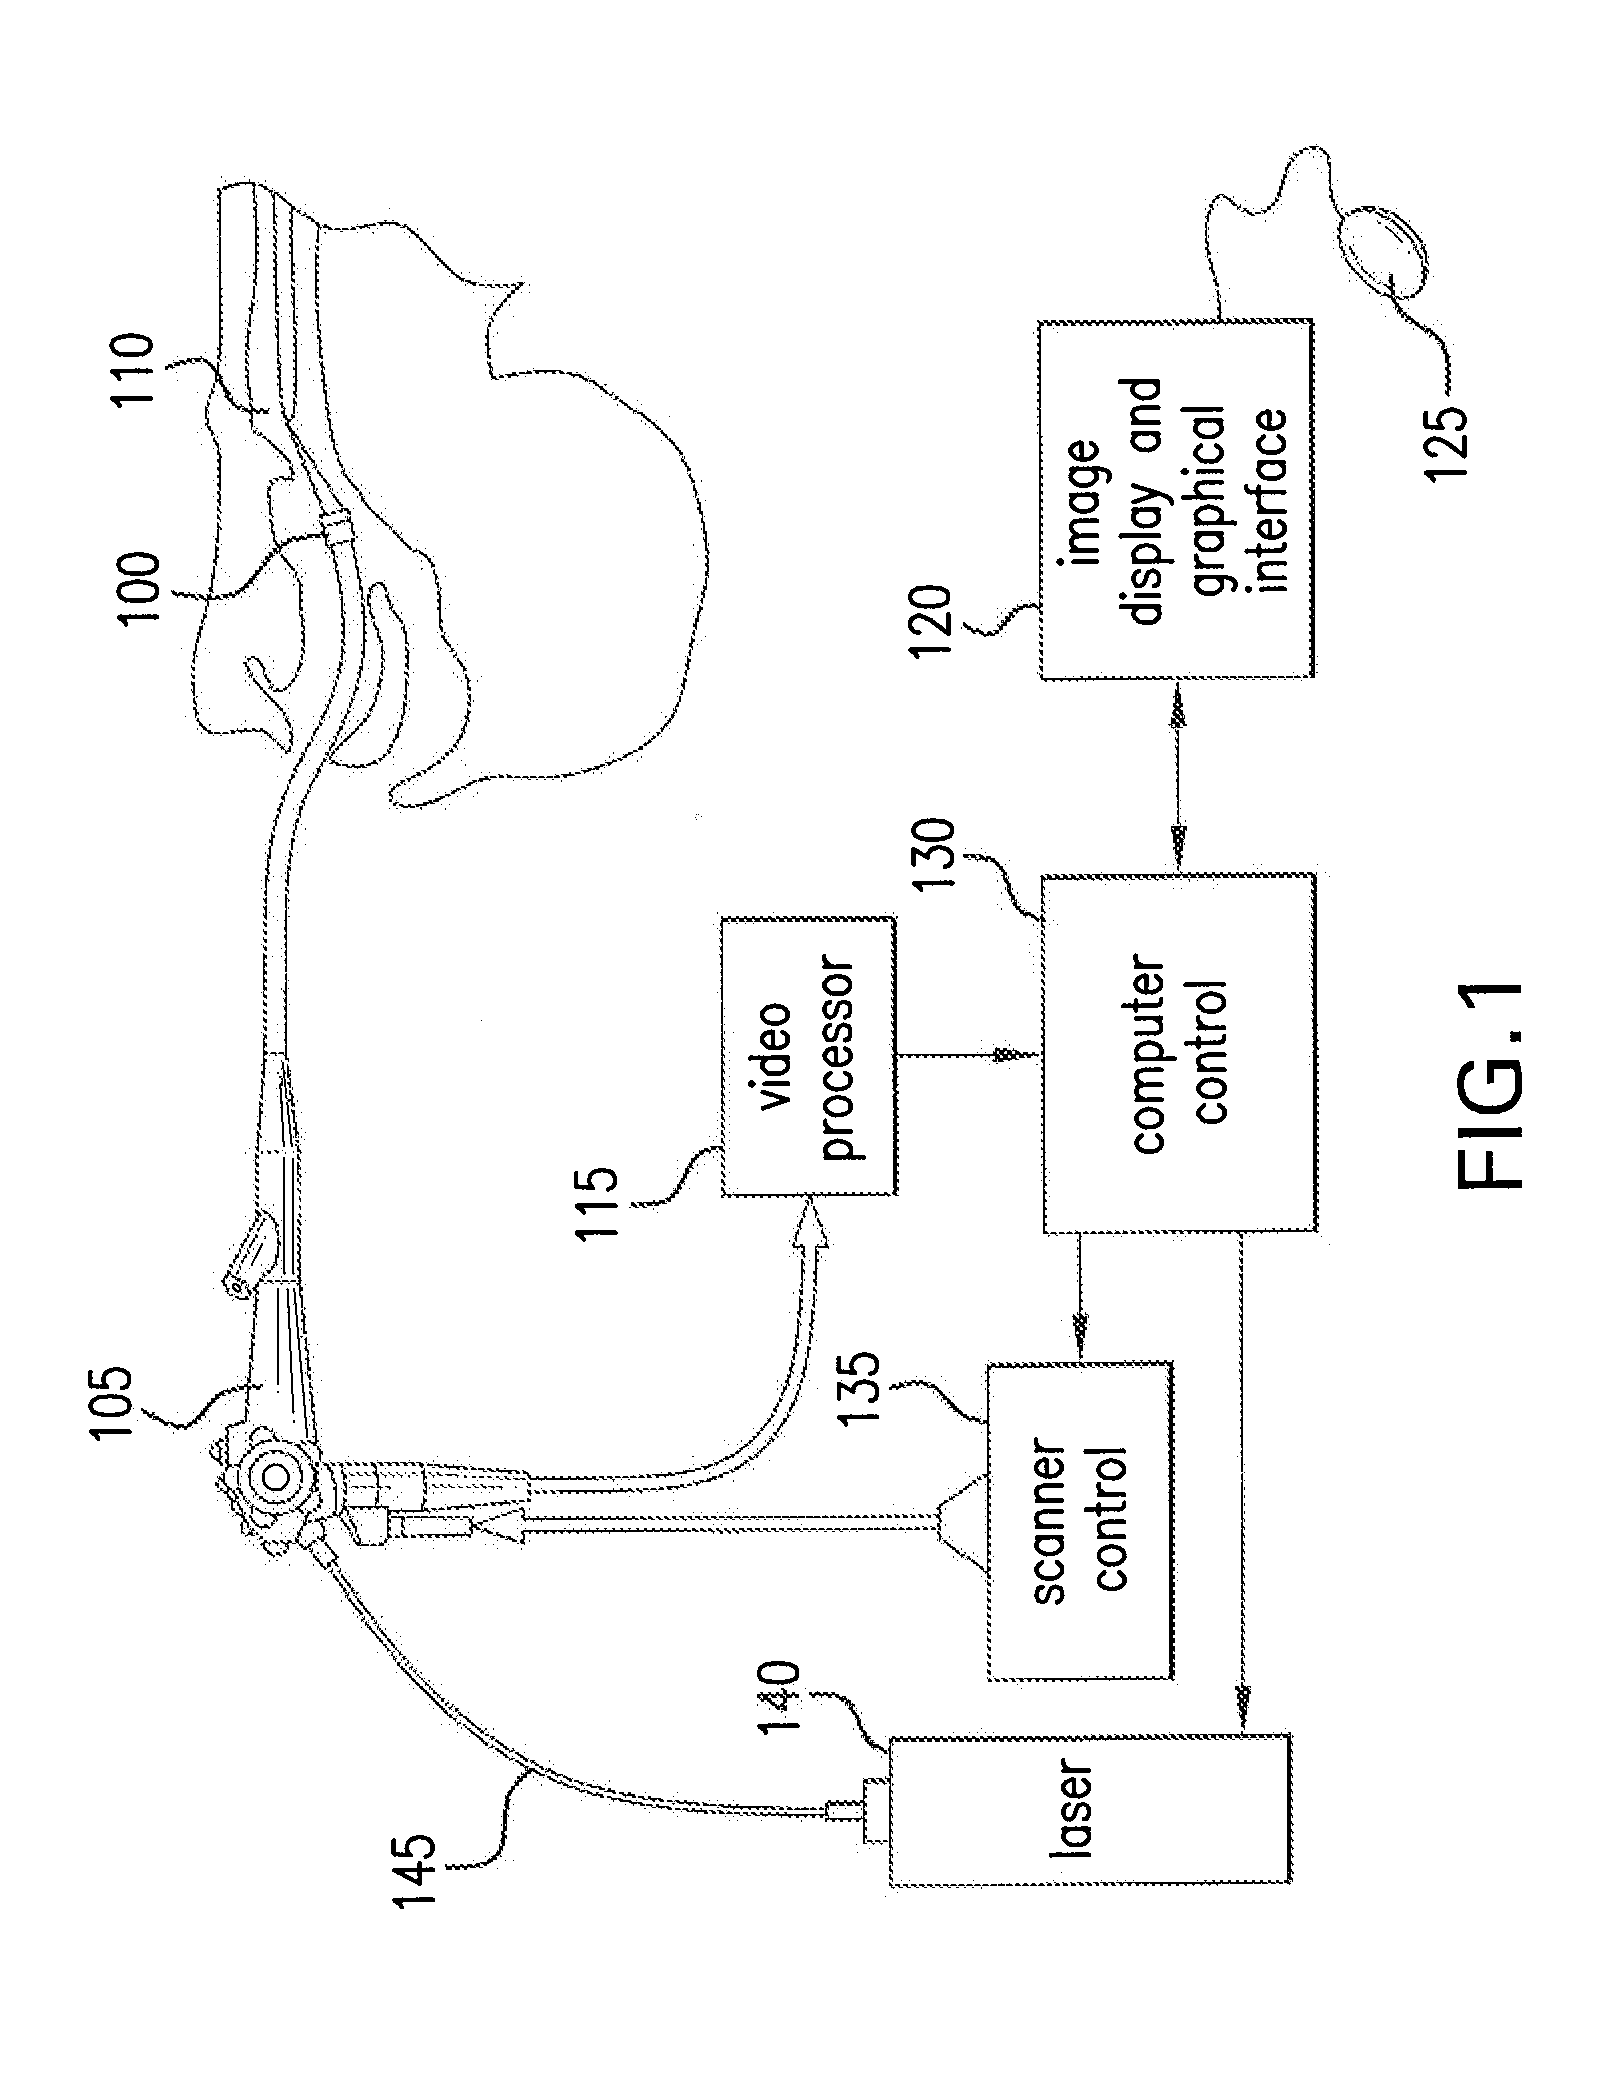 Apparatus, system and method for providing laser steering and focusing for incision, excision and ablation of tissue in minimally-invasive surgery